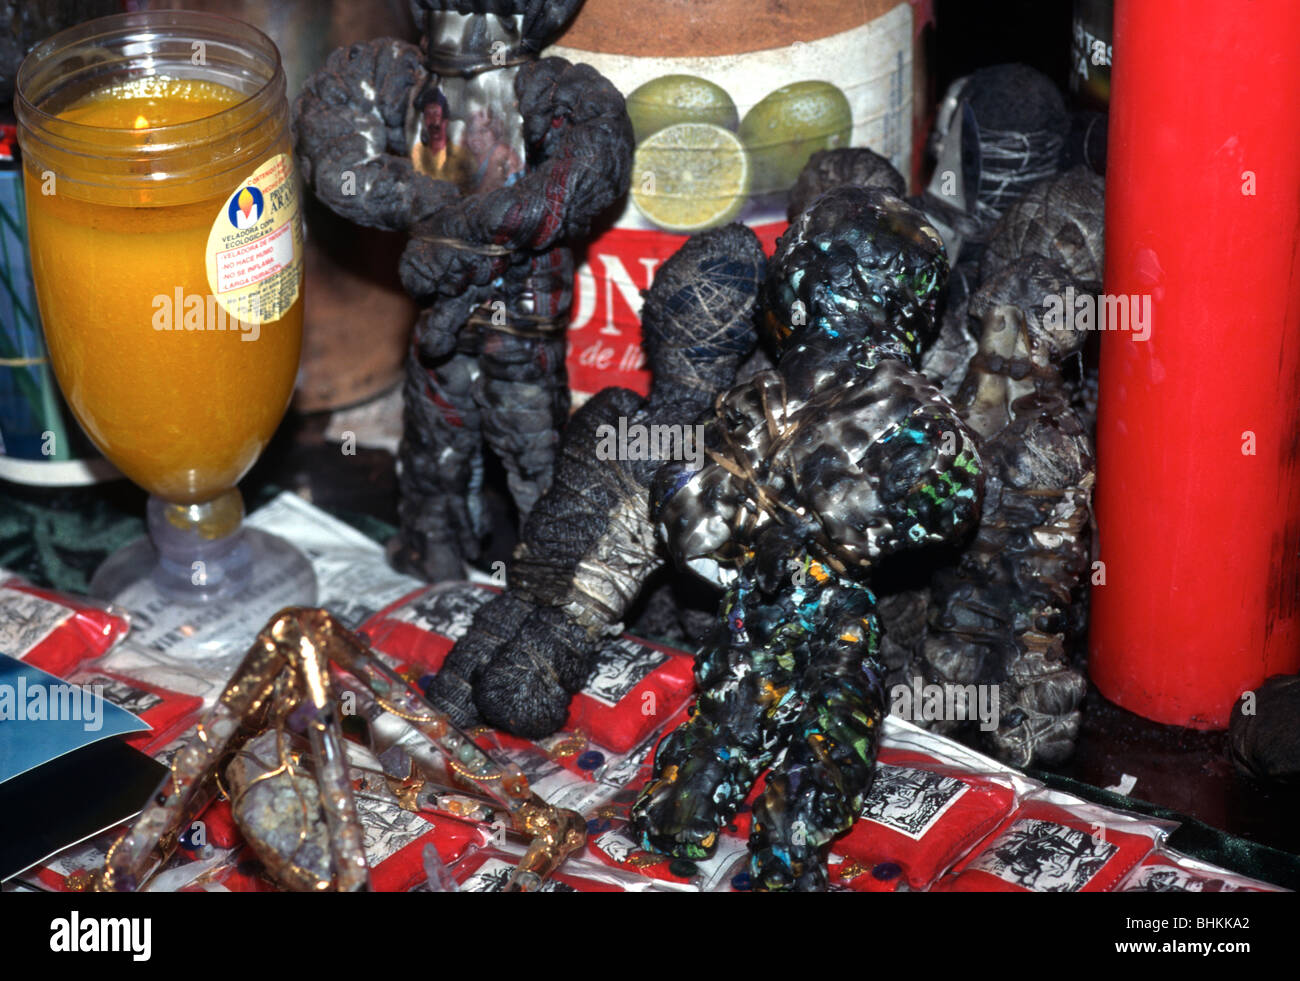 Items on the table of a brujo (witch doctor), including voodoo dolls, candles, spell potions and a pentacle, Catemaco, Mexico. Stock Photo